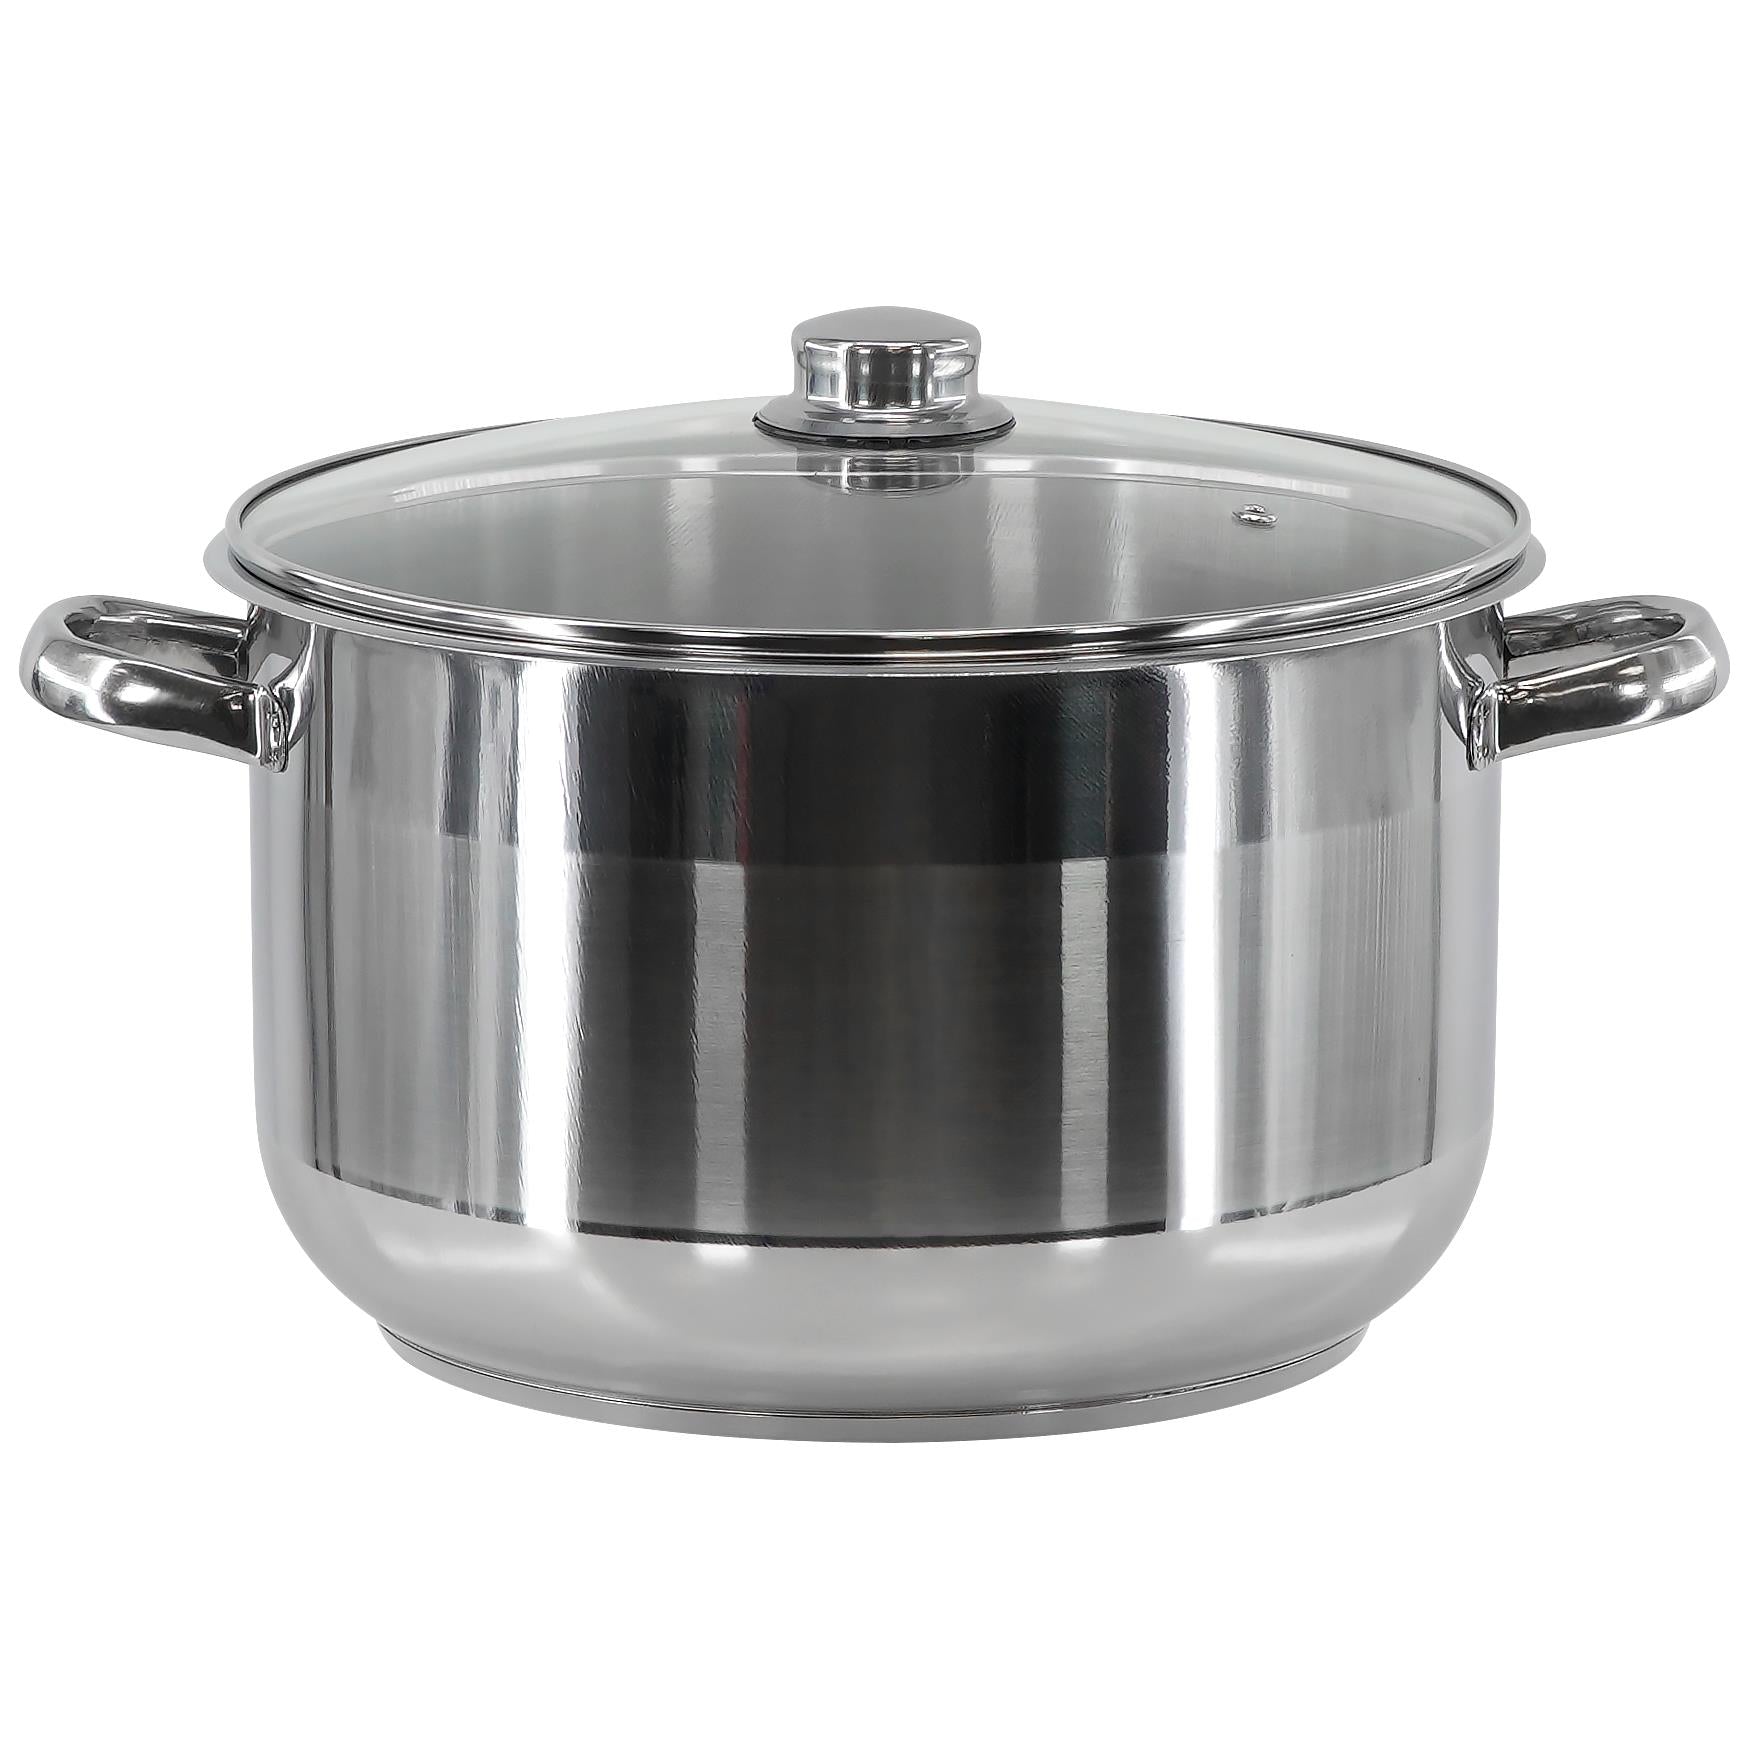 Induction Stockpot With Glass Lid - 14 ltr by GEEZY - UKBuyZone